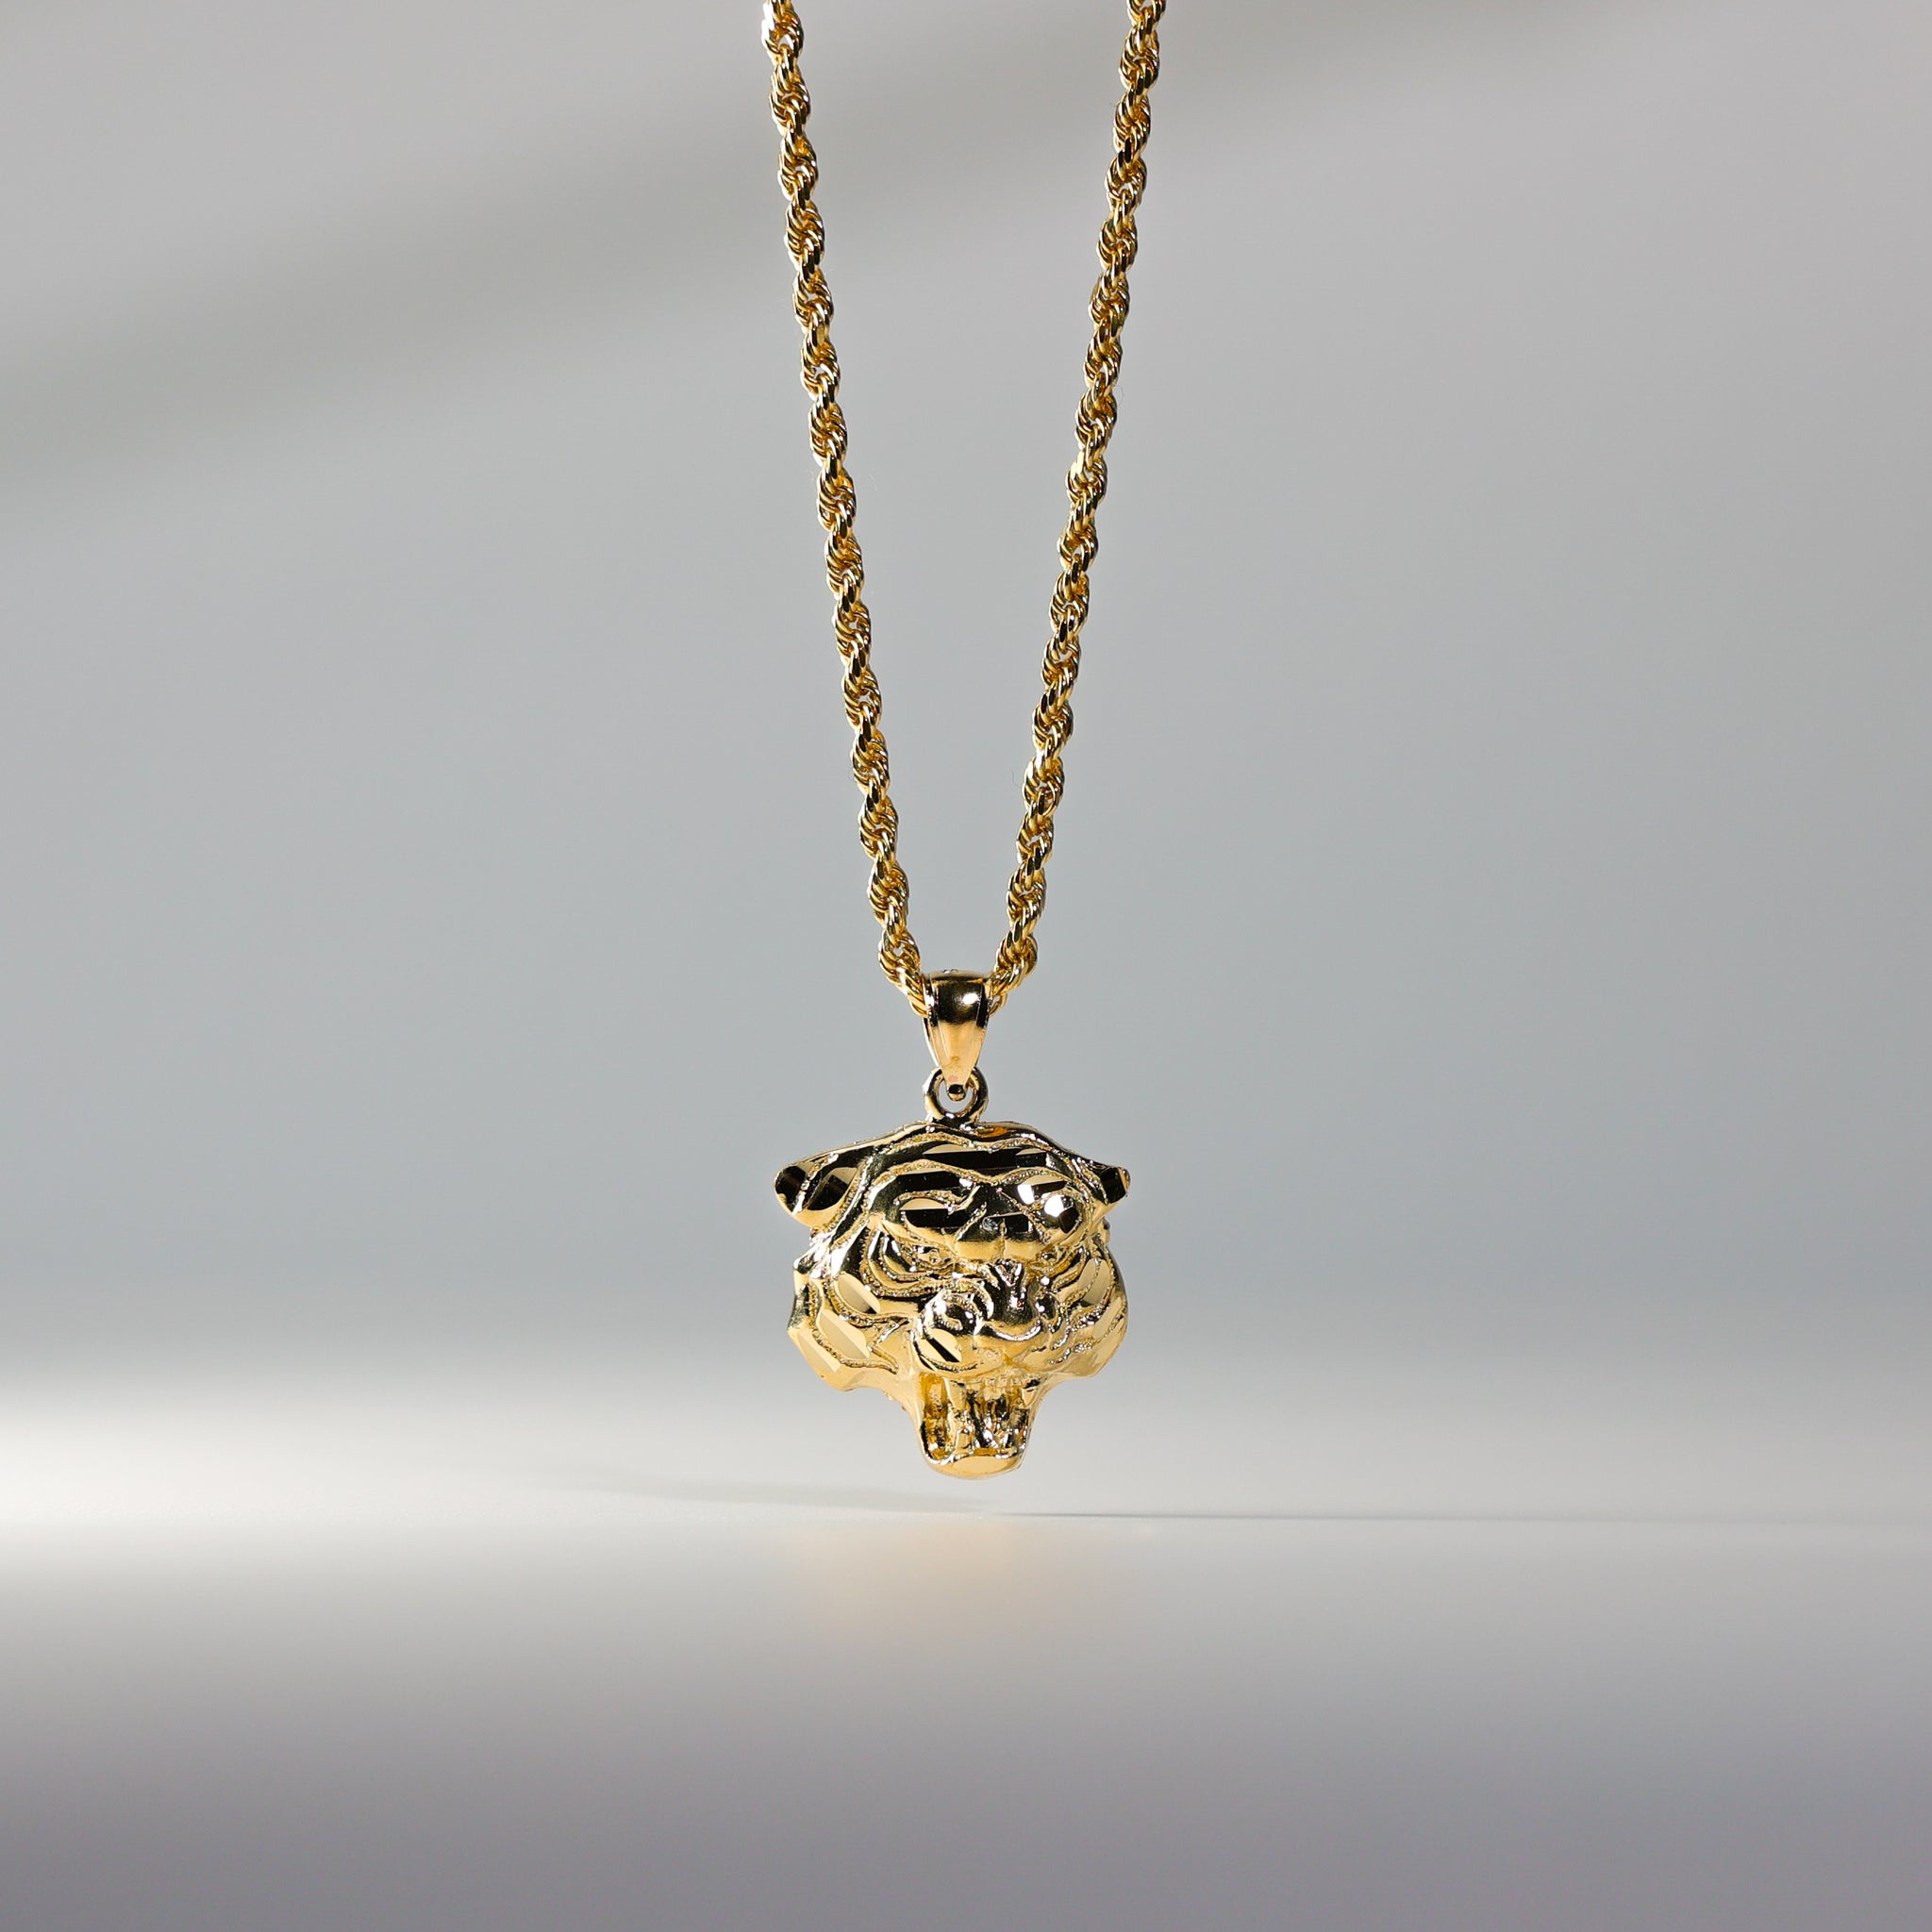 Men's Fashion Gold Silver Two Color Tiger Pendant Necklace Hip-Hop Gold  Diamond Tiger Necklace Jewelry Punk Party Necklace Animal Jewelry Gift |  Wish